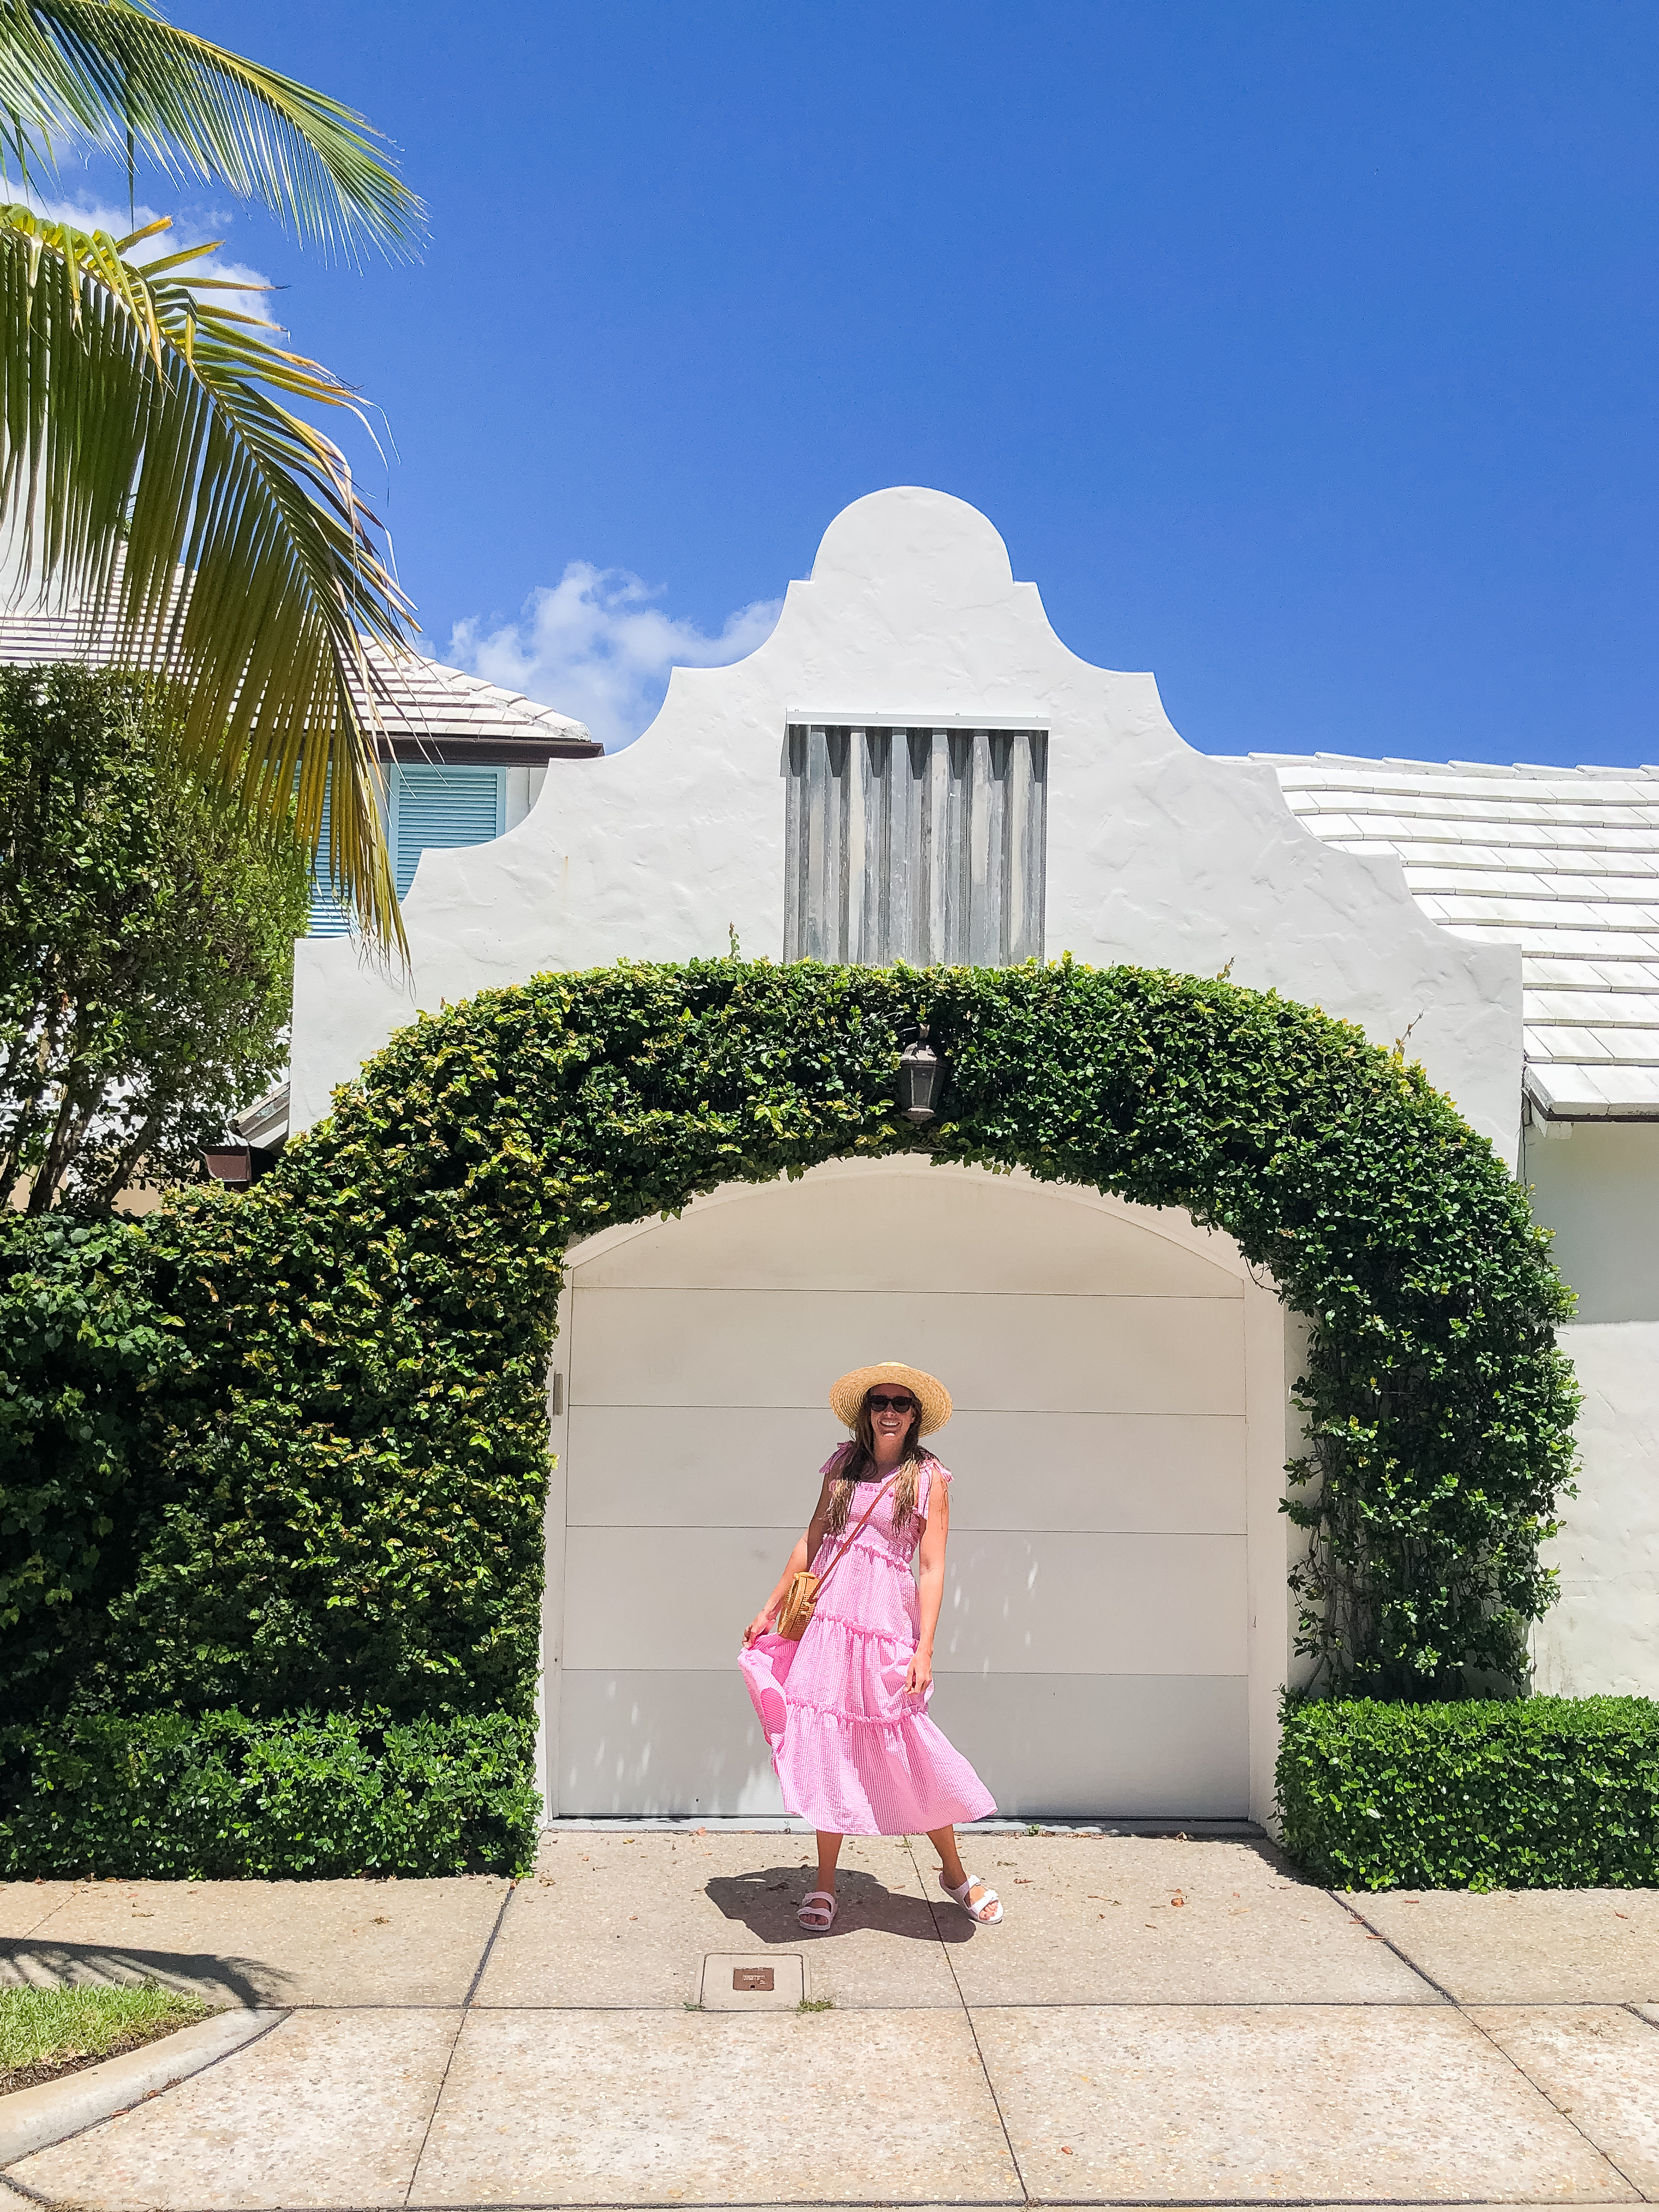 24 Hour Palm Beach Travel Guide / Palm Beach Lake Trail / Palm Beach, Florida / Palm Beach Style - Sunshine Style, A Classica and Coastal Style and Lifestyle Blog by Katie 